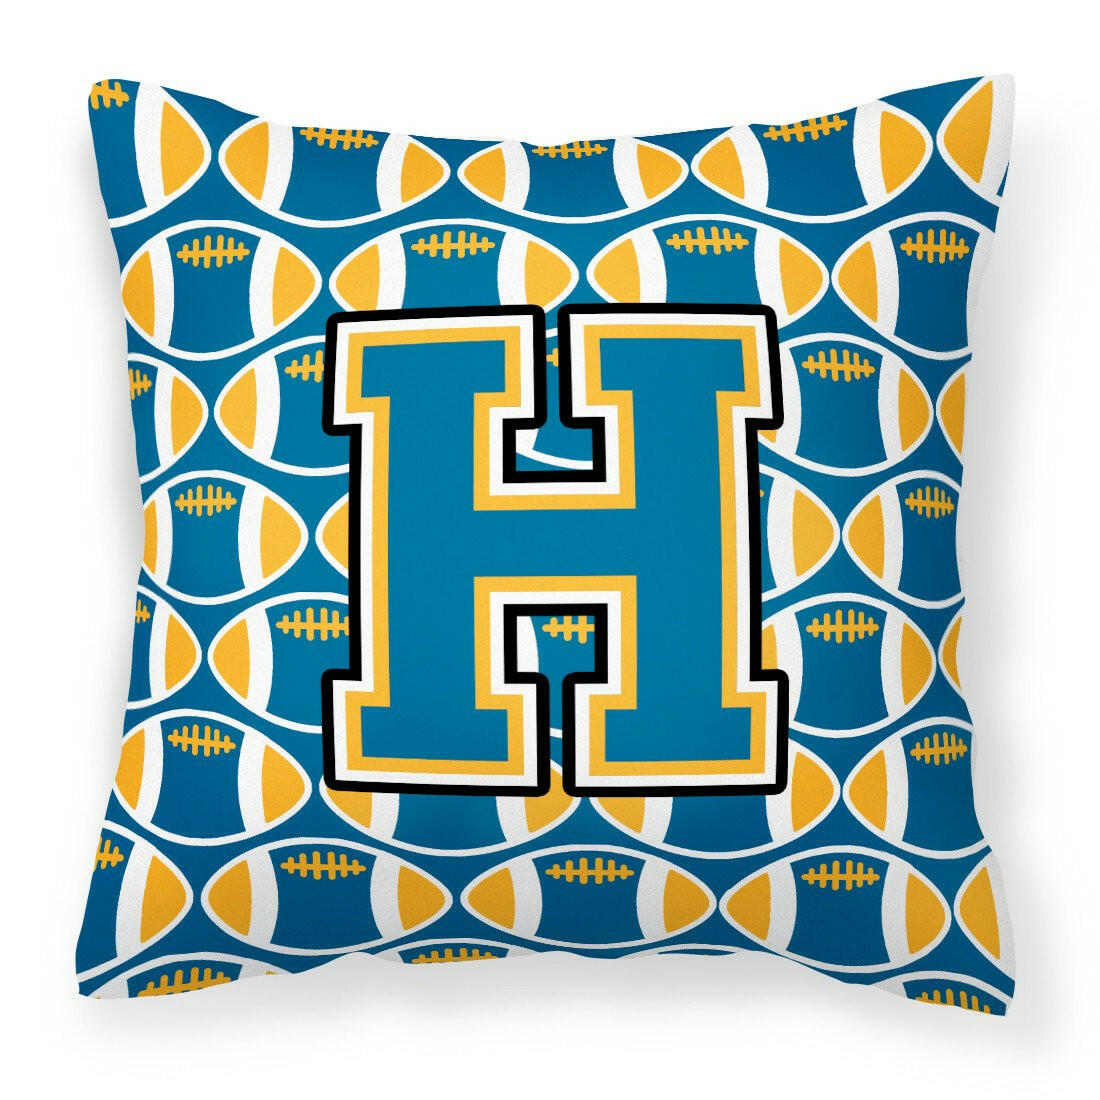 Letter H Football Blue and Gold Fabric Decorative Pillow CJ1077-HPW1414 by Caroline's Treasures